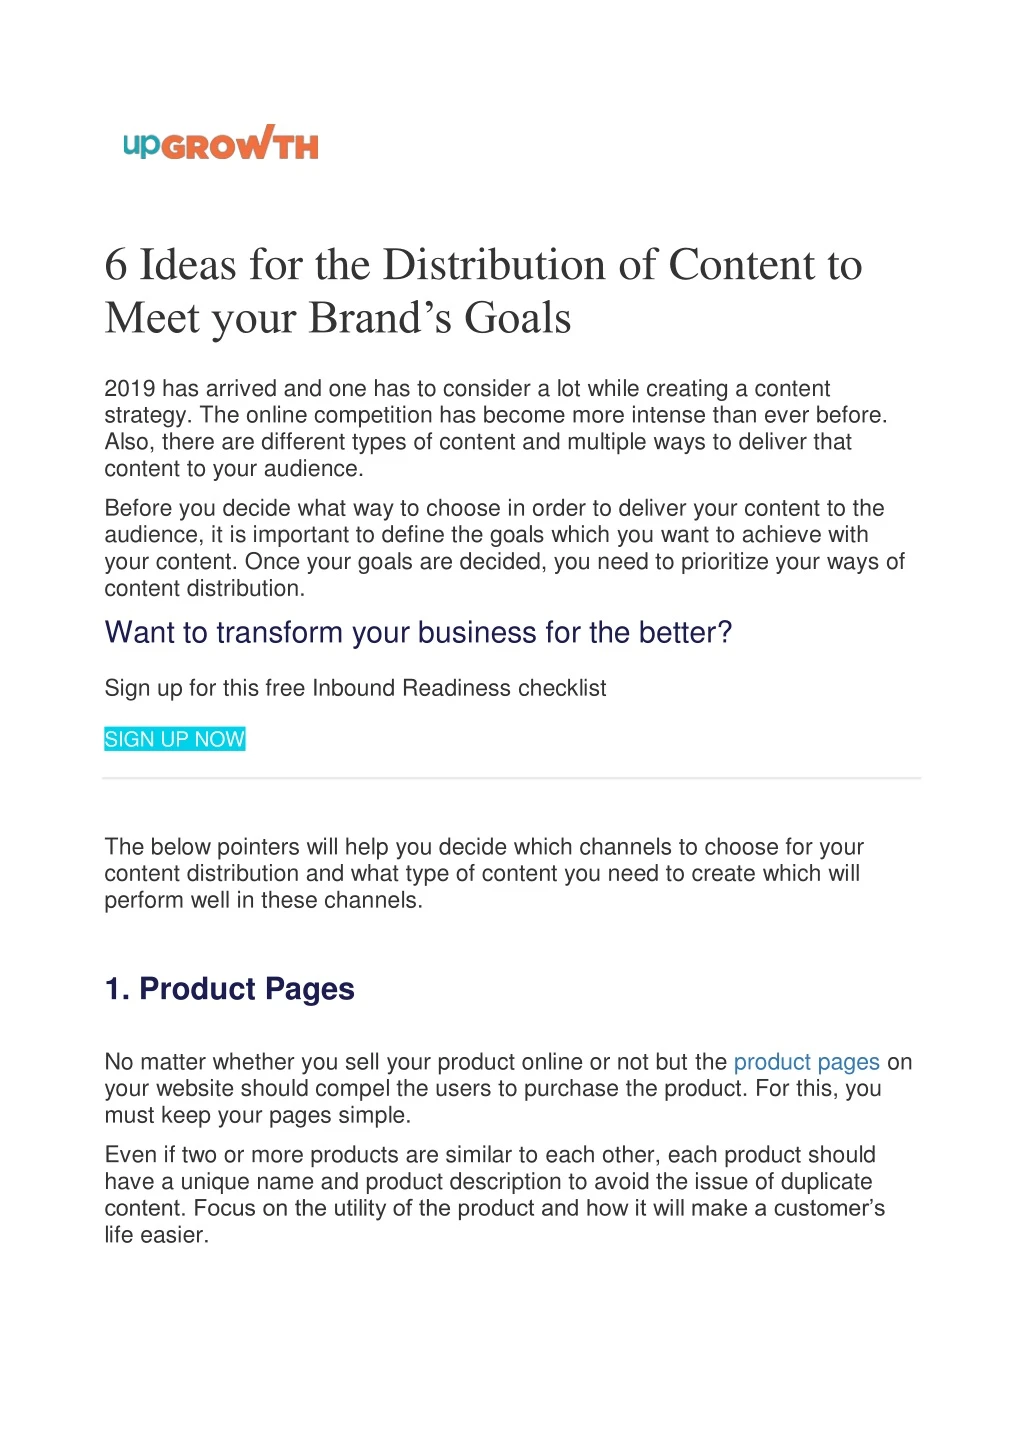 6 ideas for the distribution of content to meet